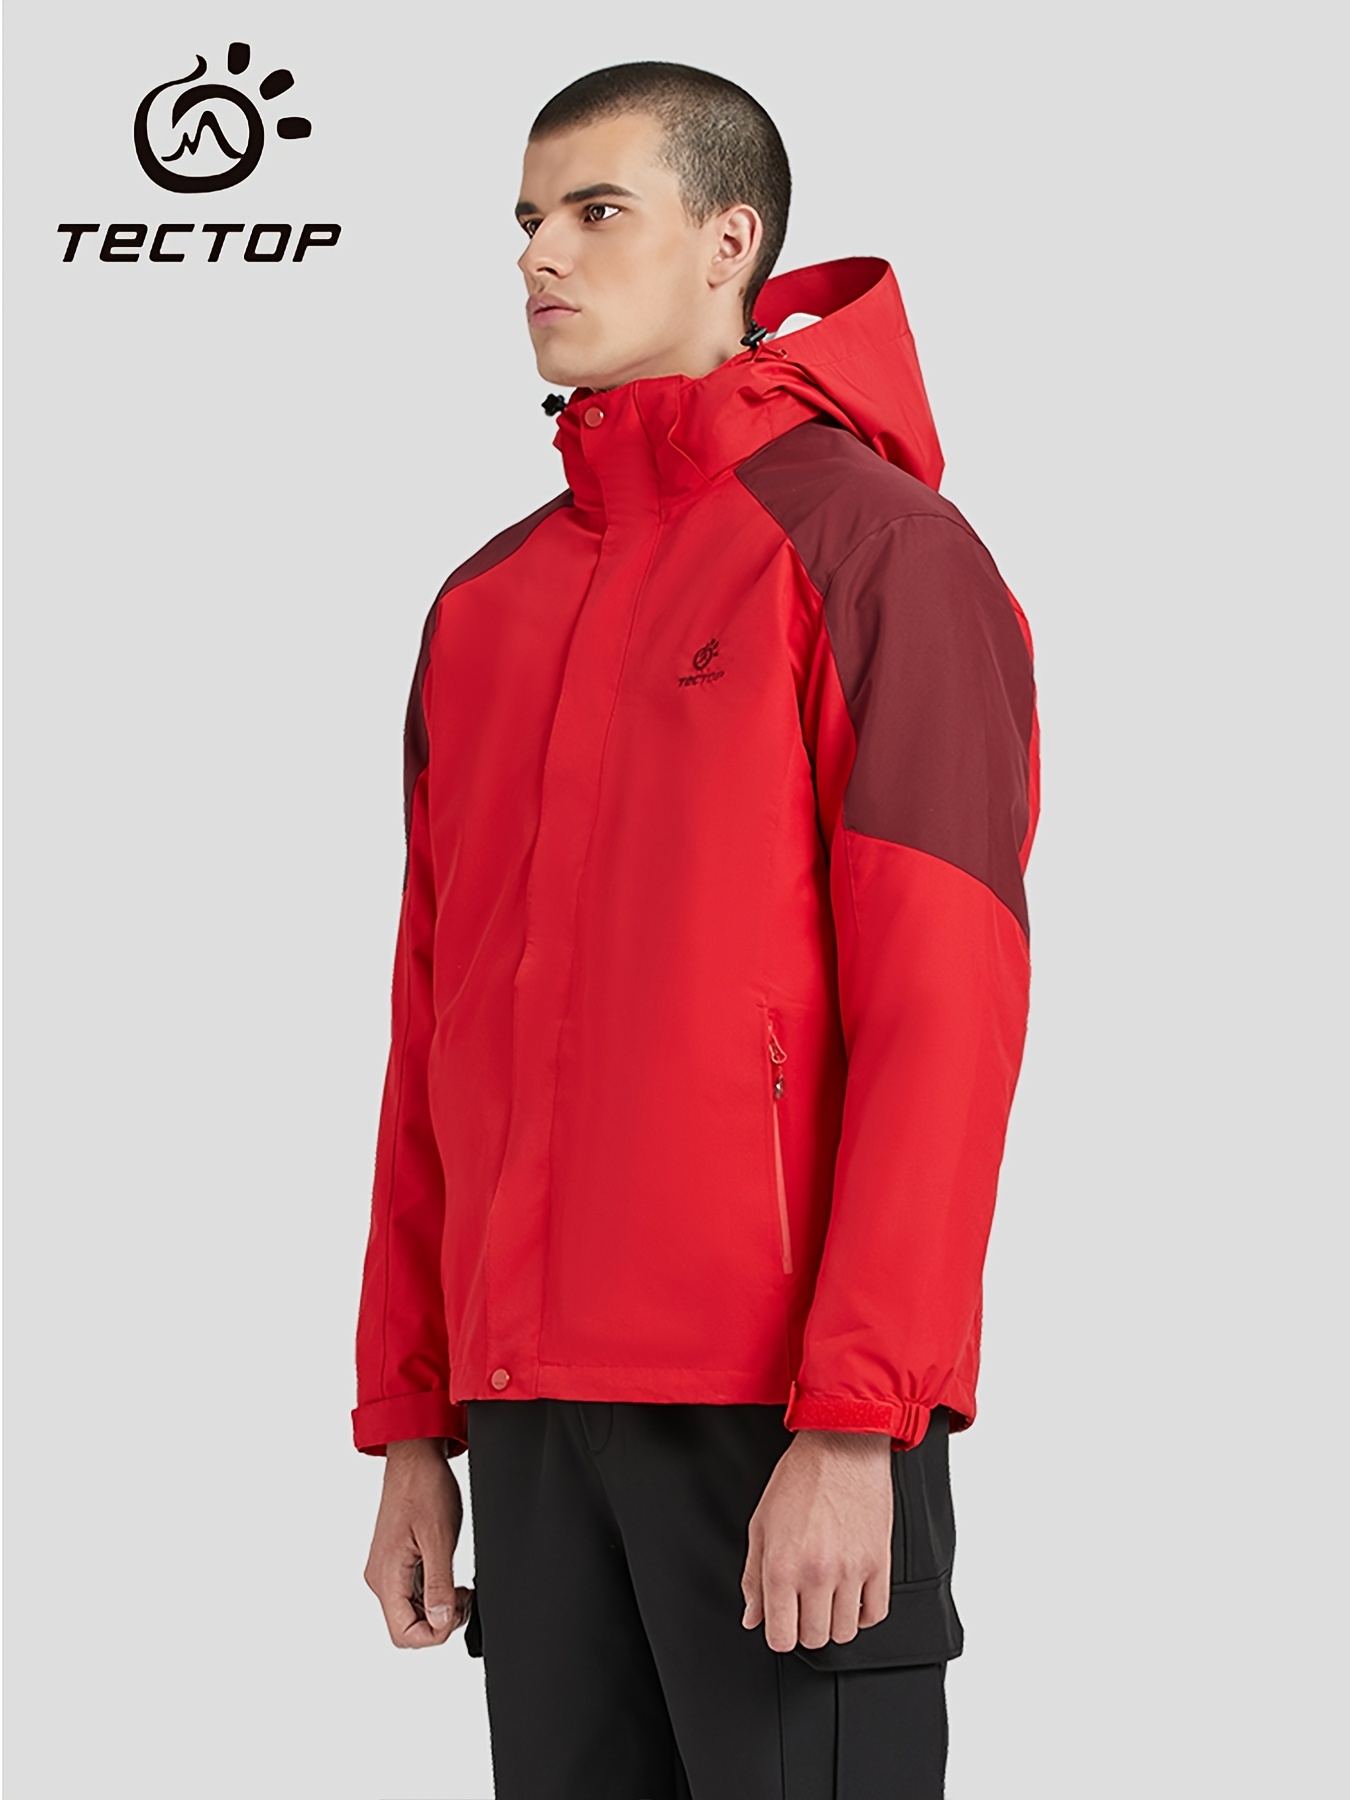 windproof and warm mens 3 in 1 ski jacket for winter outdoor sports